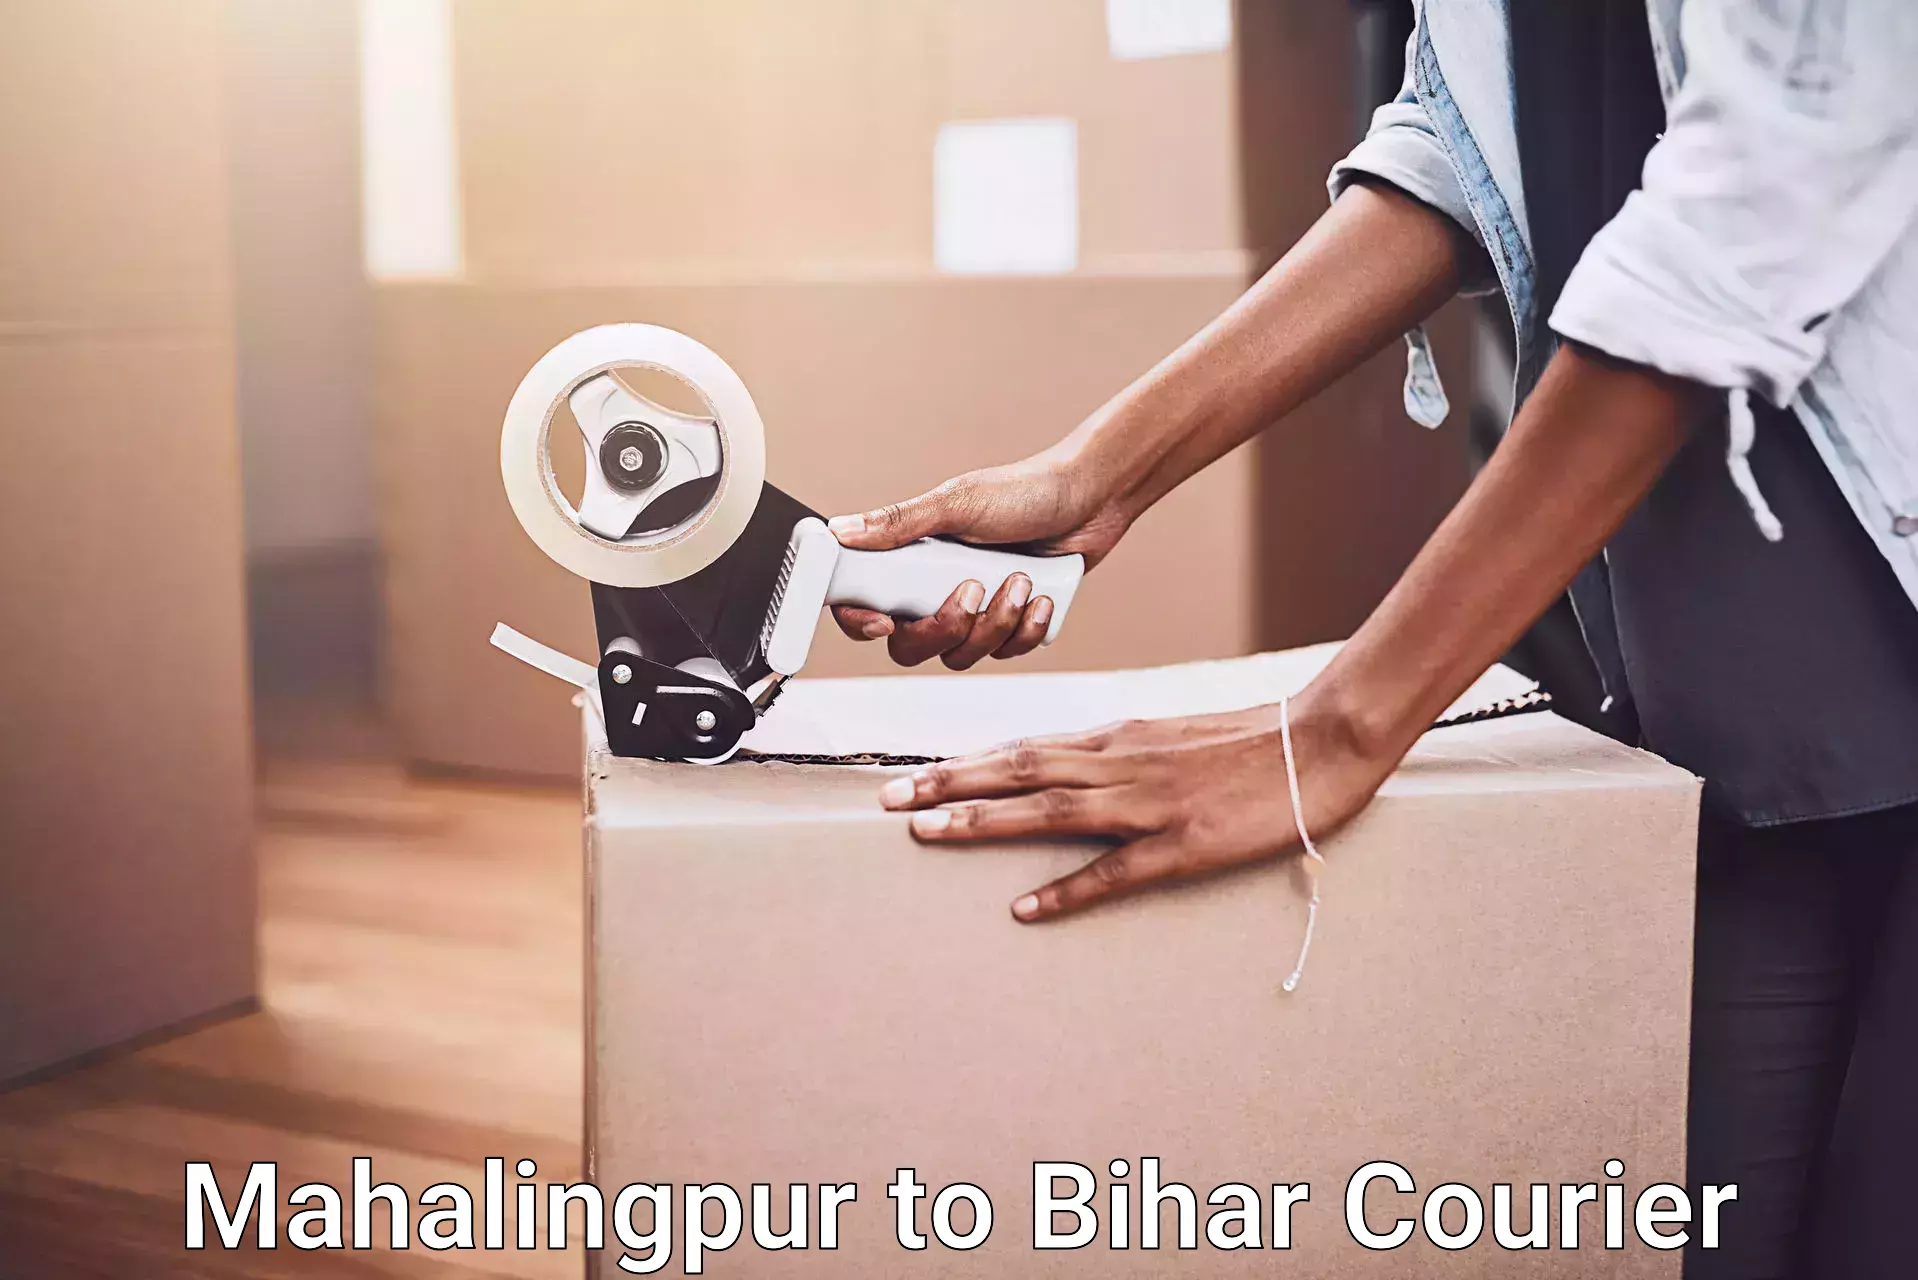 Affordable moving services in Mahalingpur to Bihar